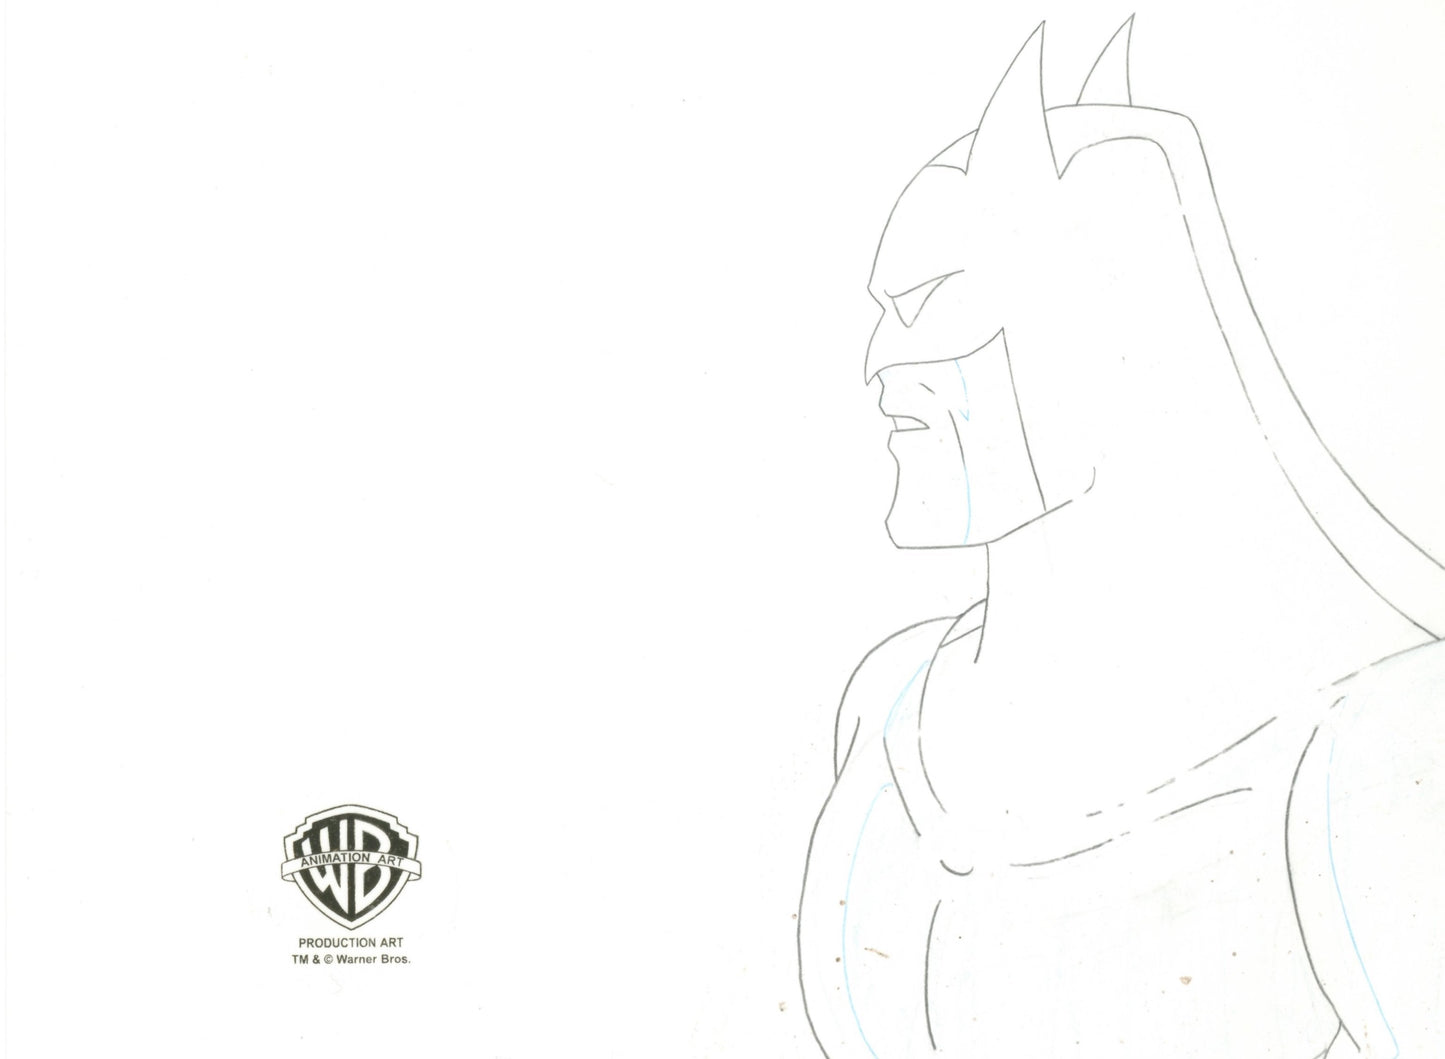 Batman The Animated Series Original Production Cel Signed by Kevin Altieri with Matching Drawing: Batman, Talia